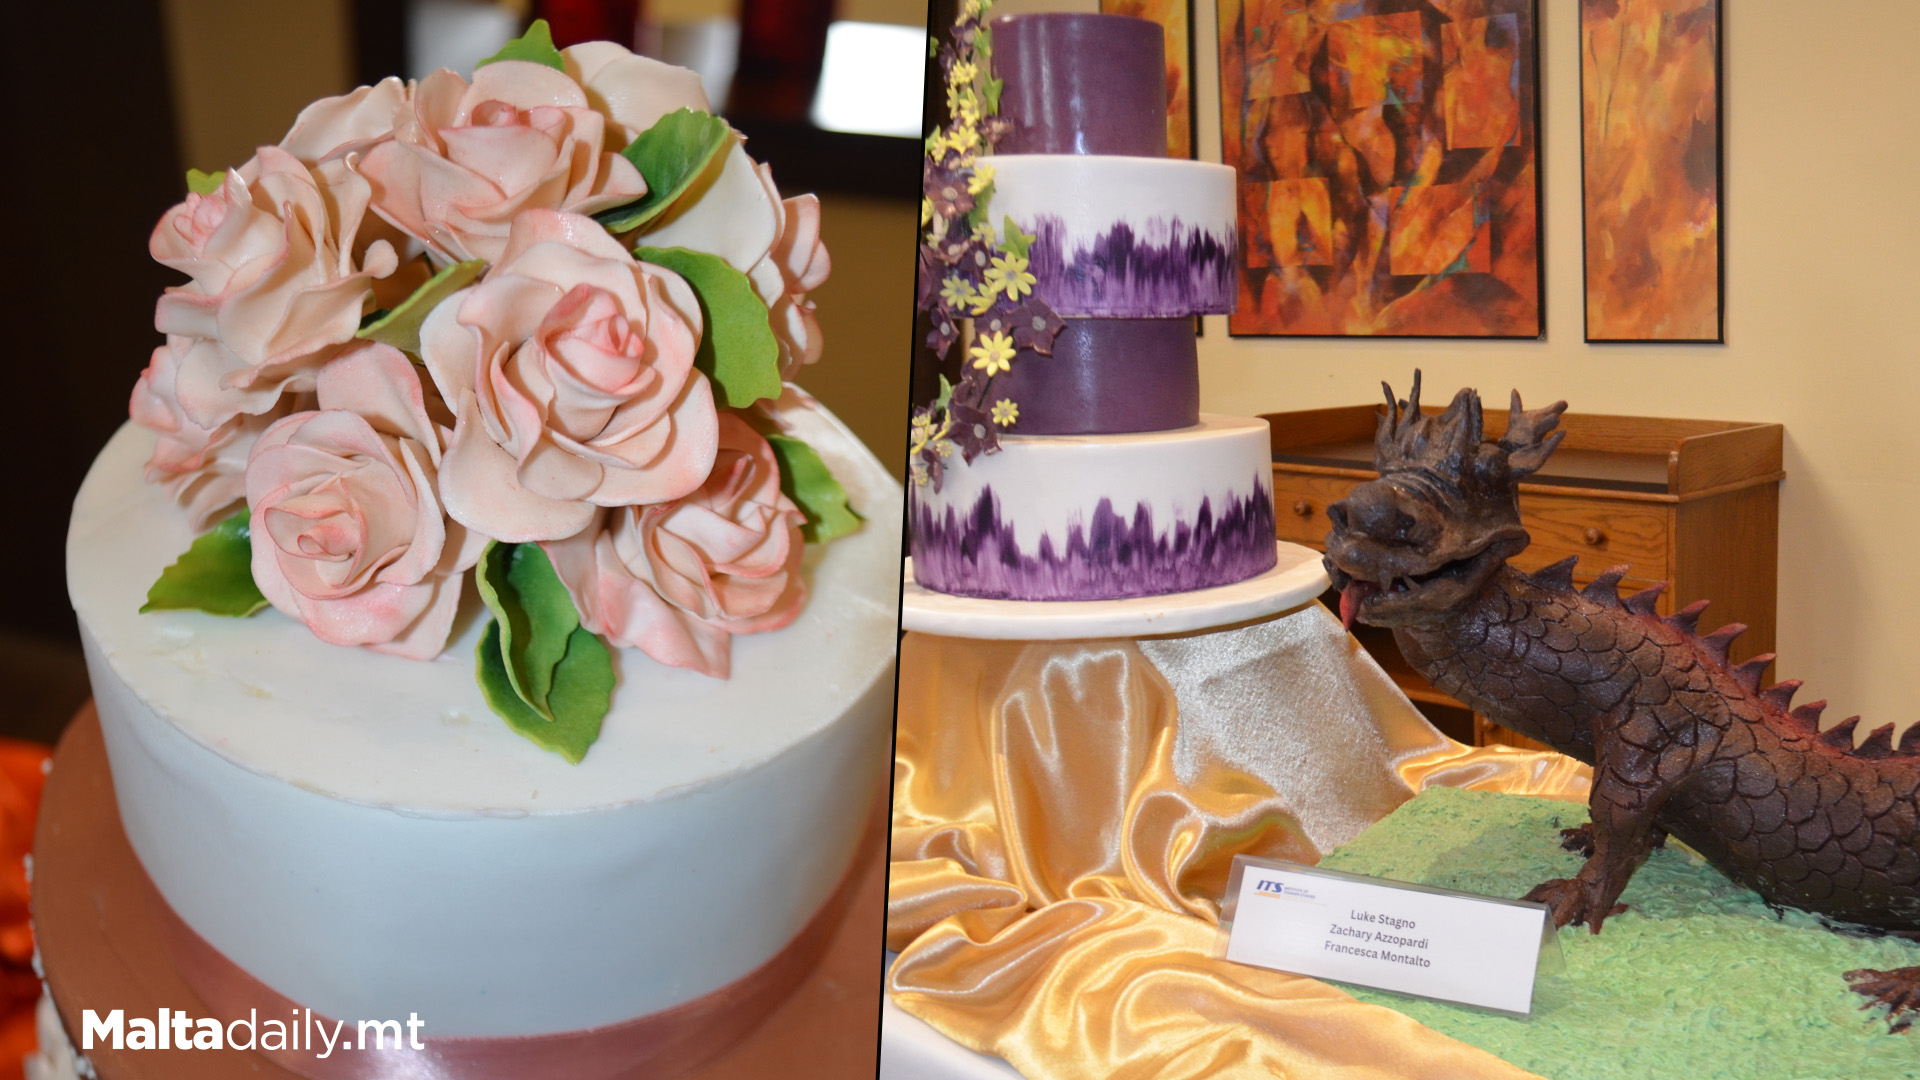 ITS Culinary Students Create Stunning Cakes & Chocolate Sculptures